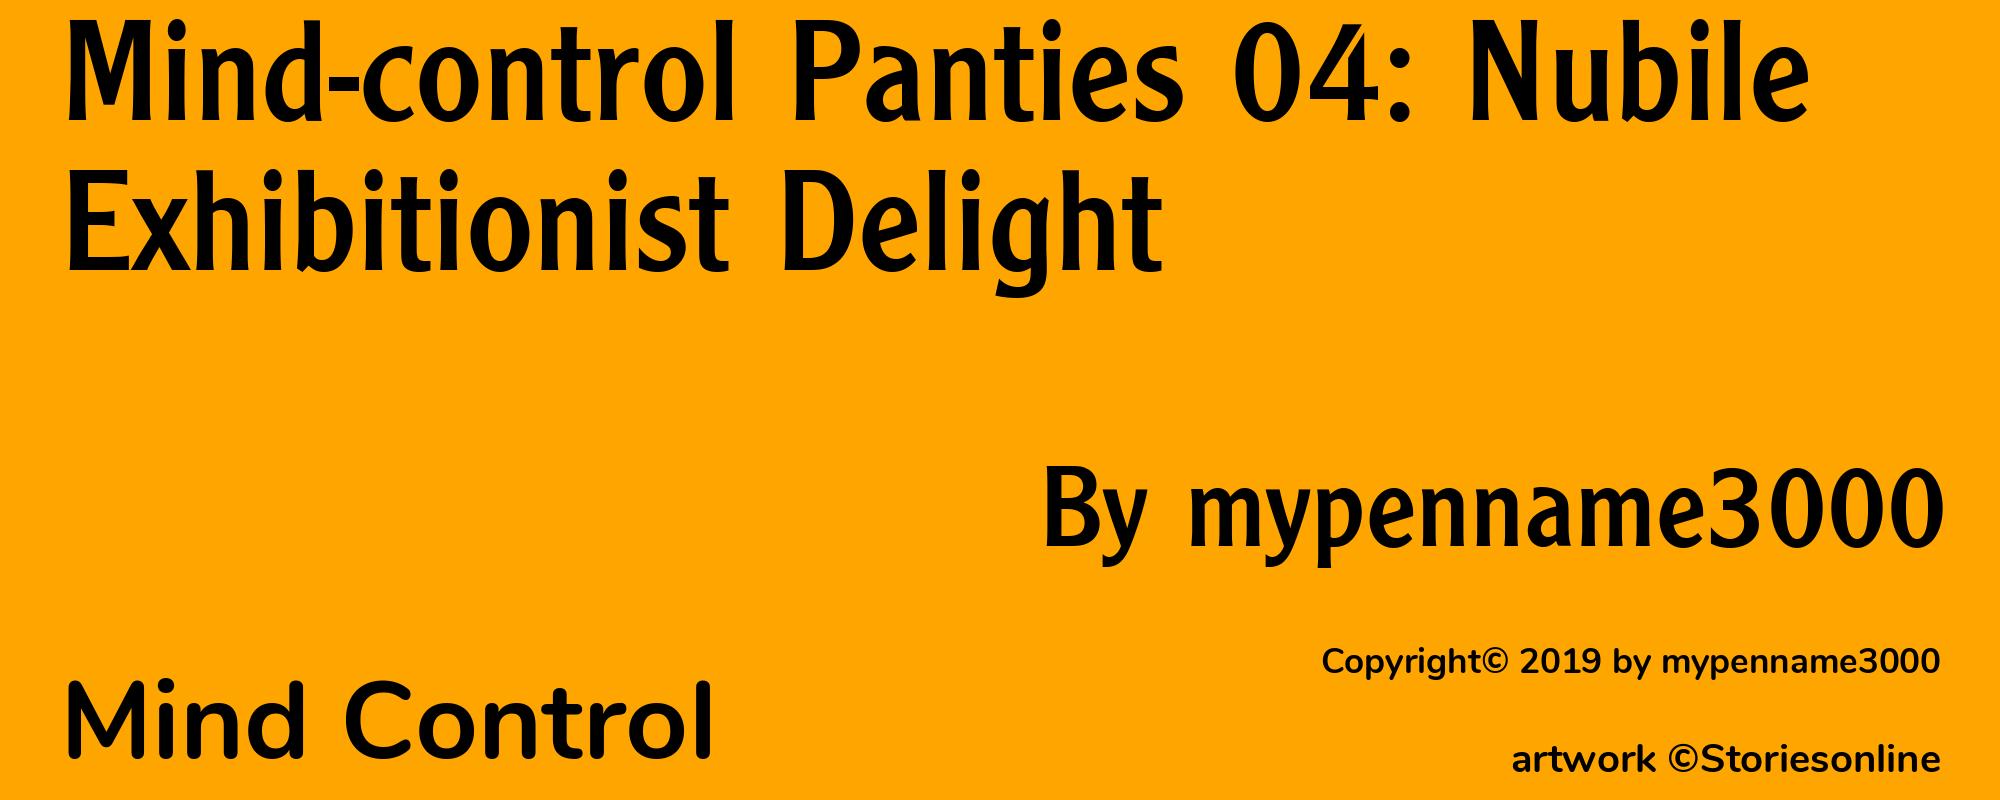 Mind-control Panties 04: Nubile Exhibitionist Delight - Cover